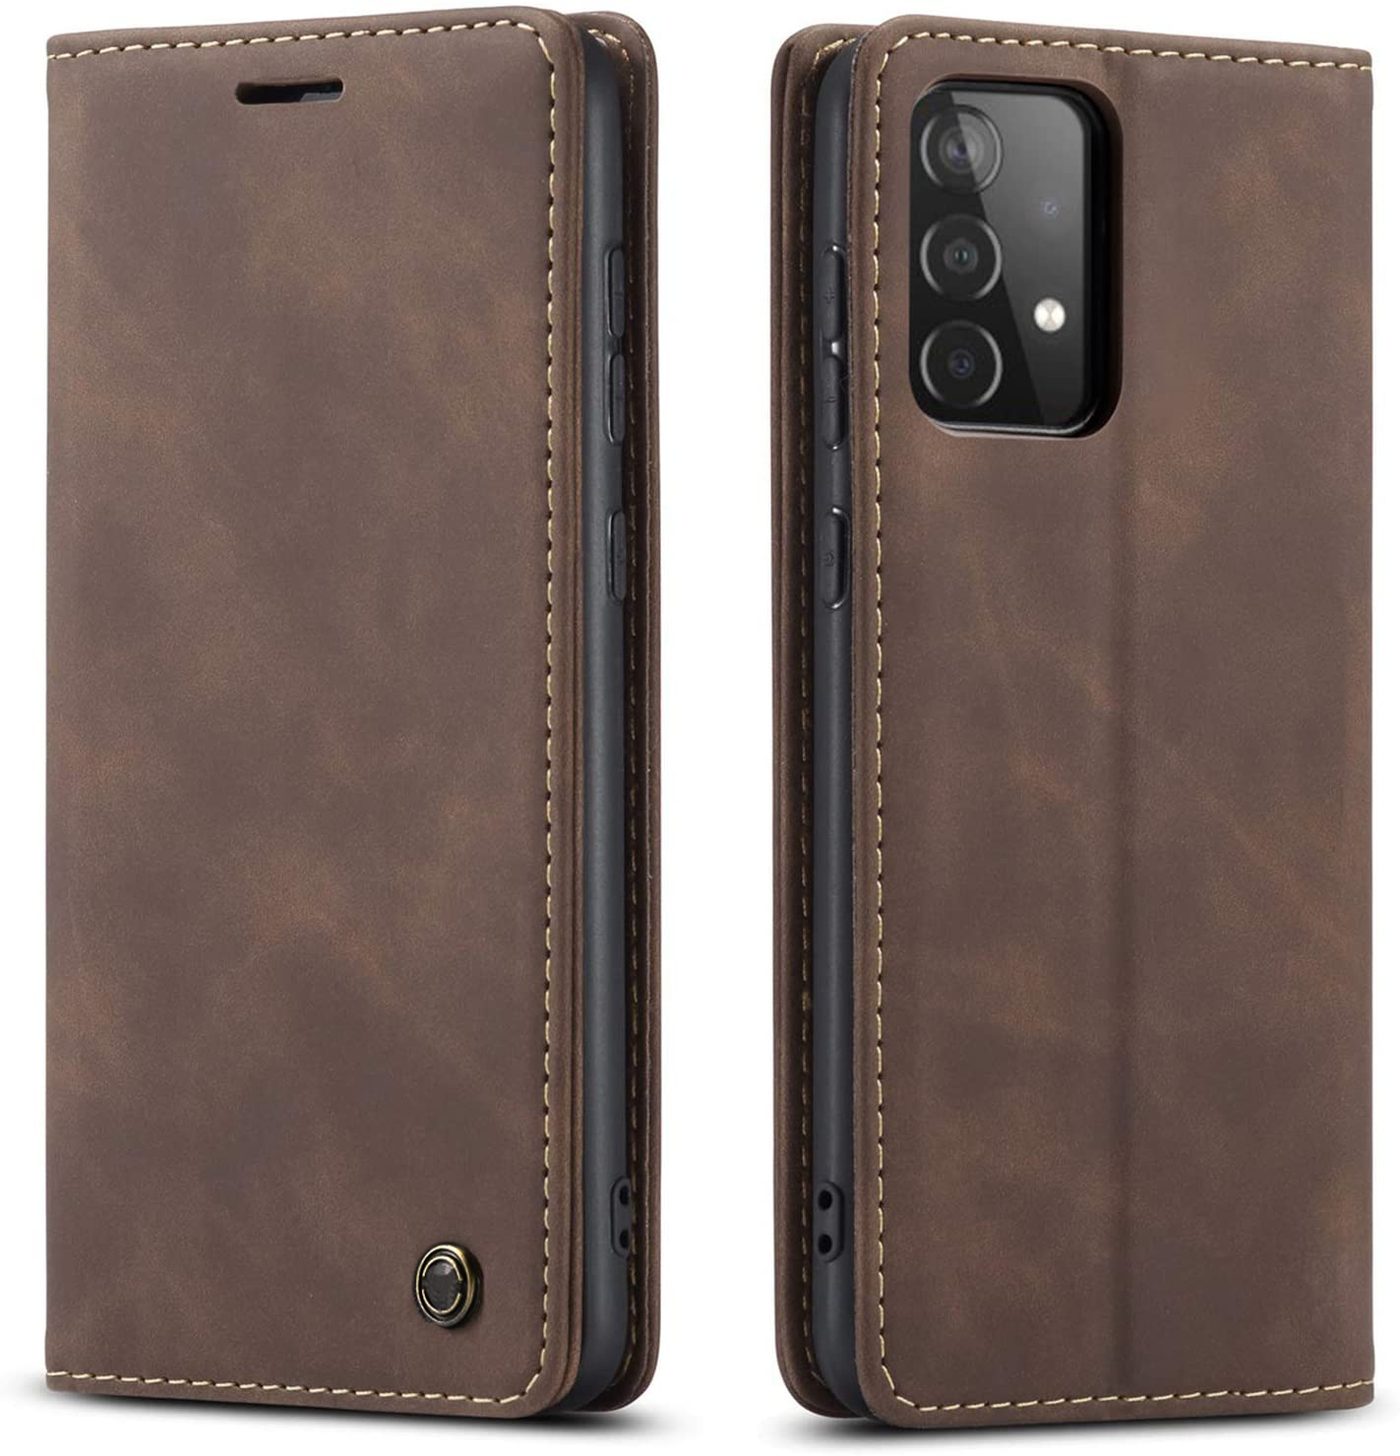 Samsung Galaxy A52s coffee color leather wallet flip cover case By excelsior